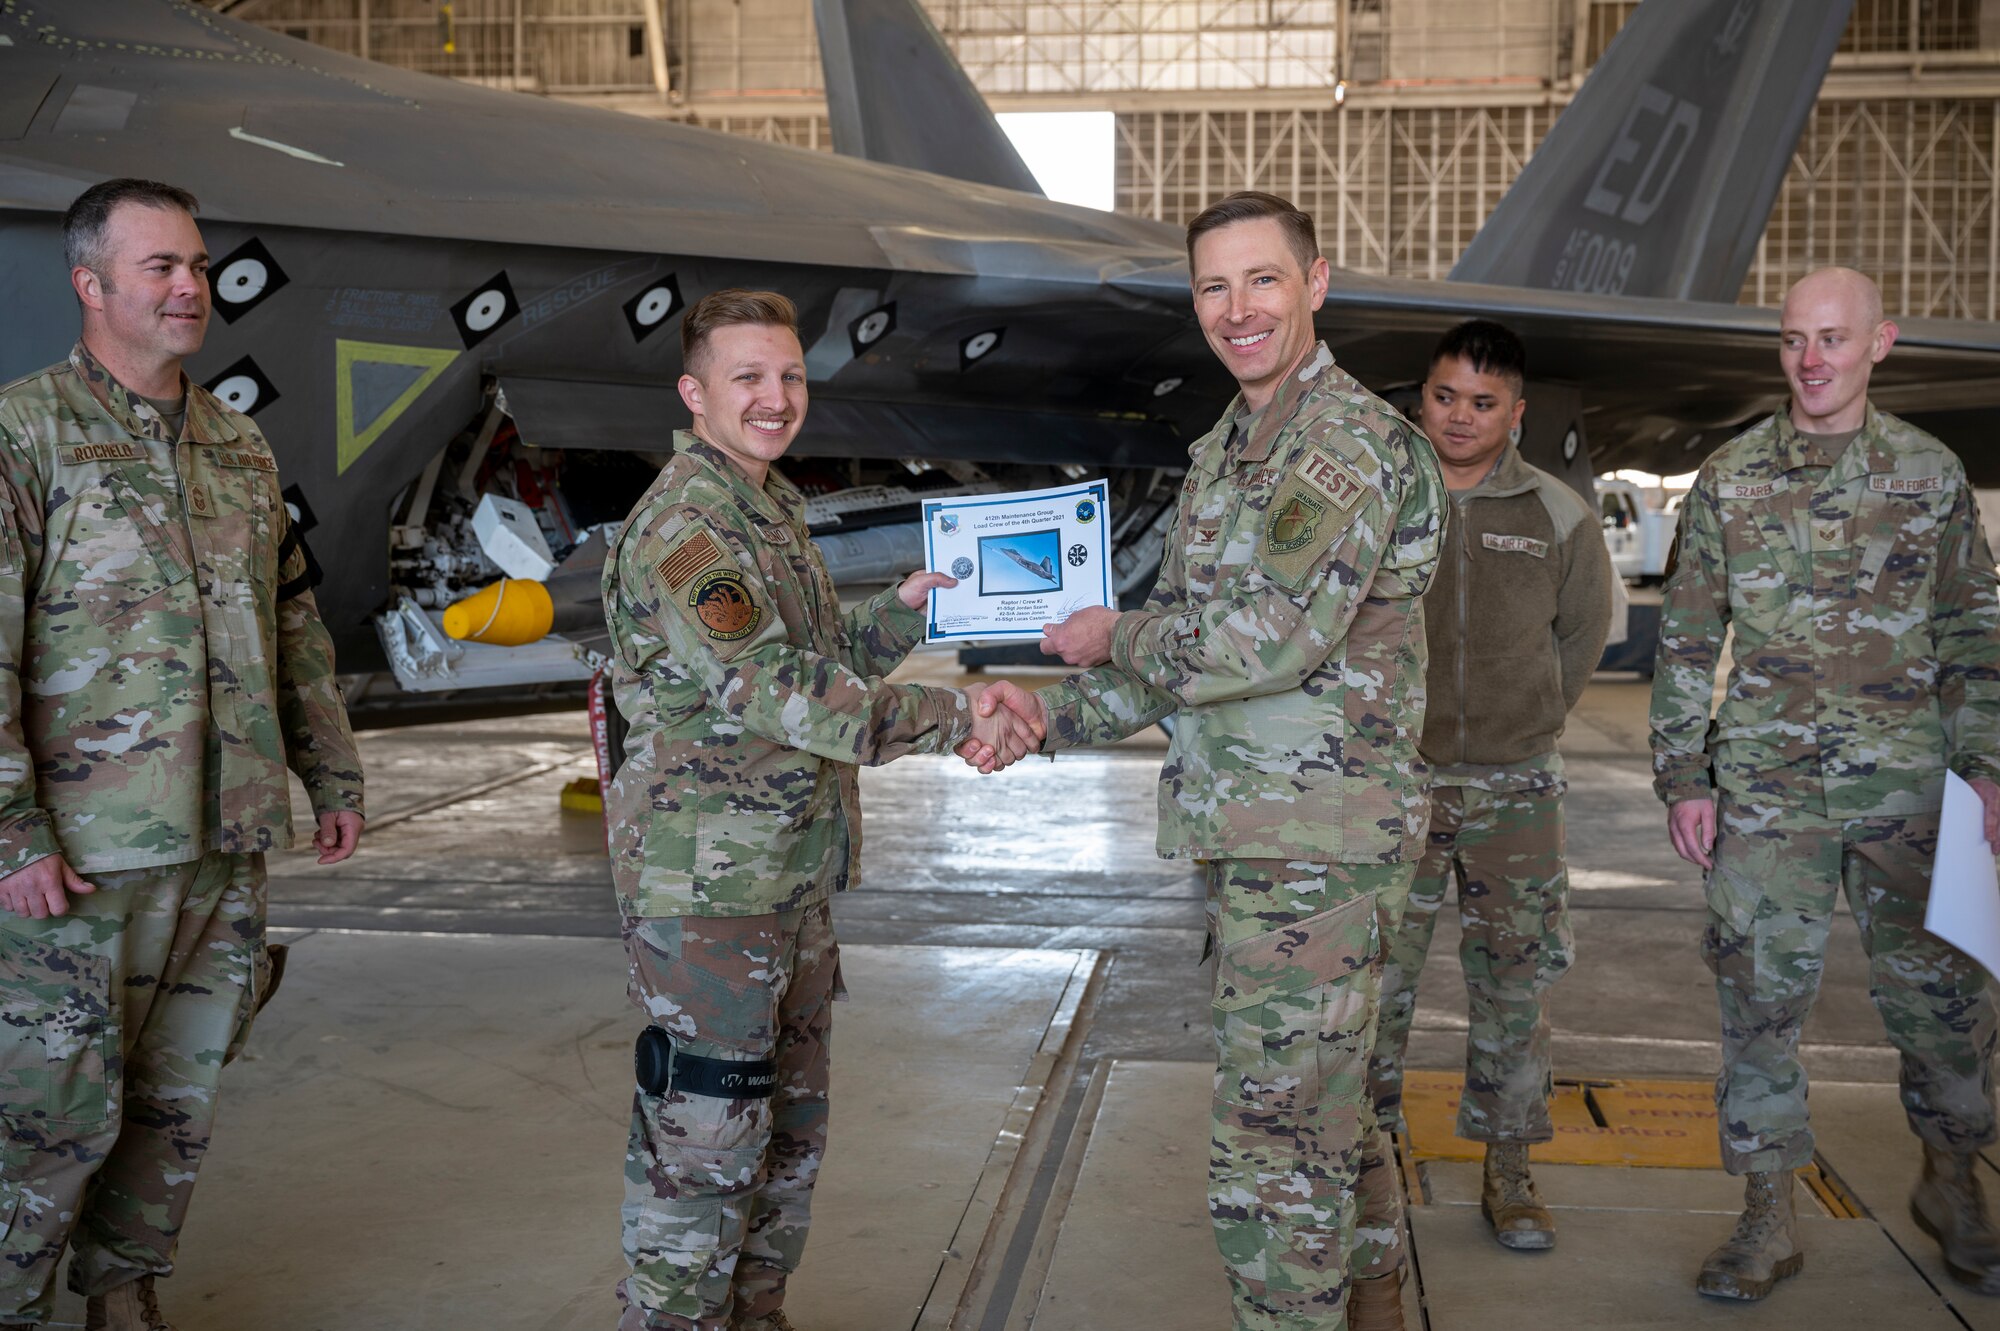 The 411th Raptor AMU wins the 3rd Quarter Weapons Load Crew of the Quarter Competition. (Pictured: Col. Matthew Caspers, Vice Commander, 412th Test Wing)